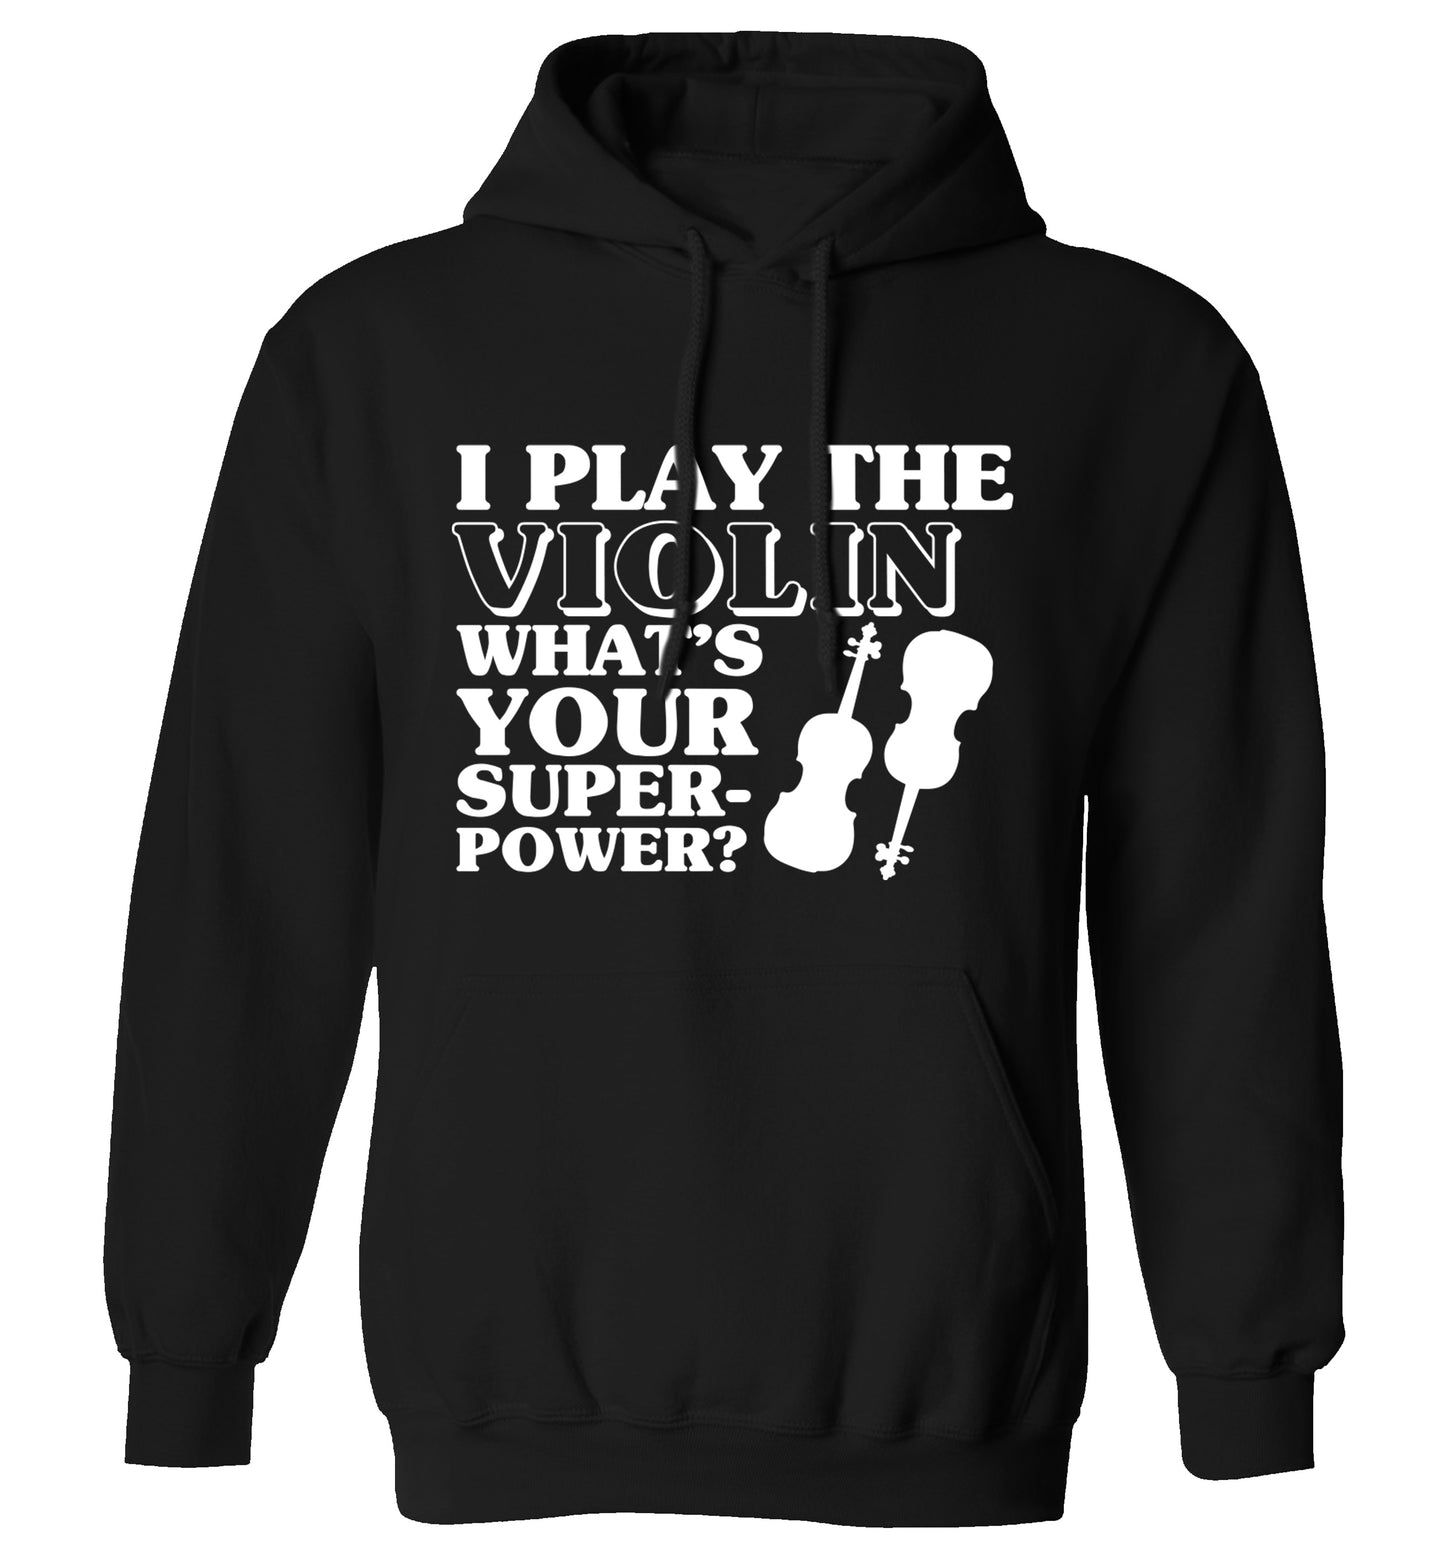 I Play Violin What's Your Superpower? adults unisex black hoodie 2XL